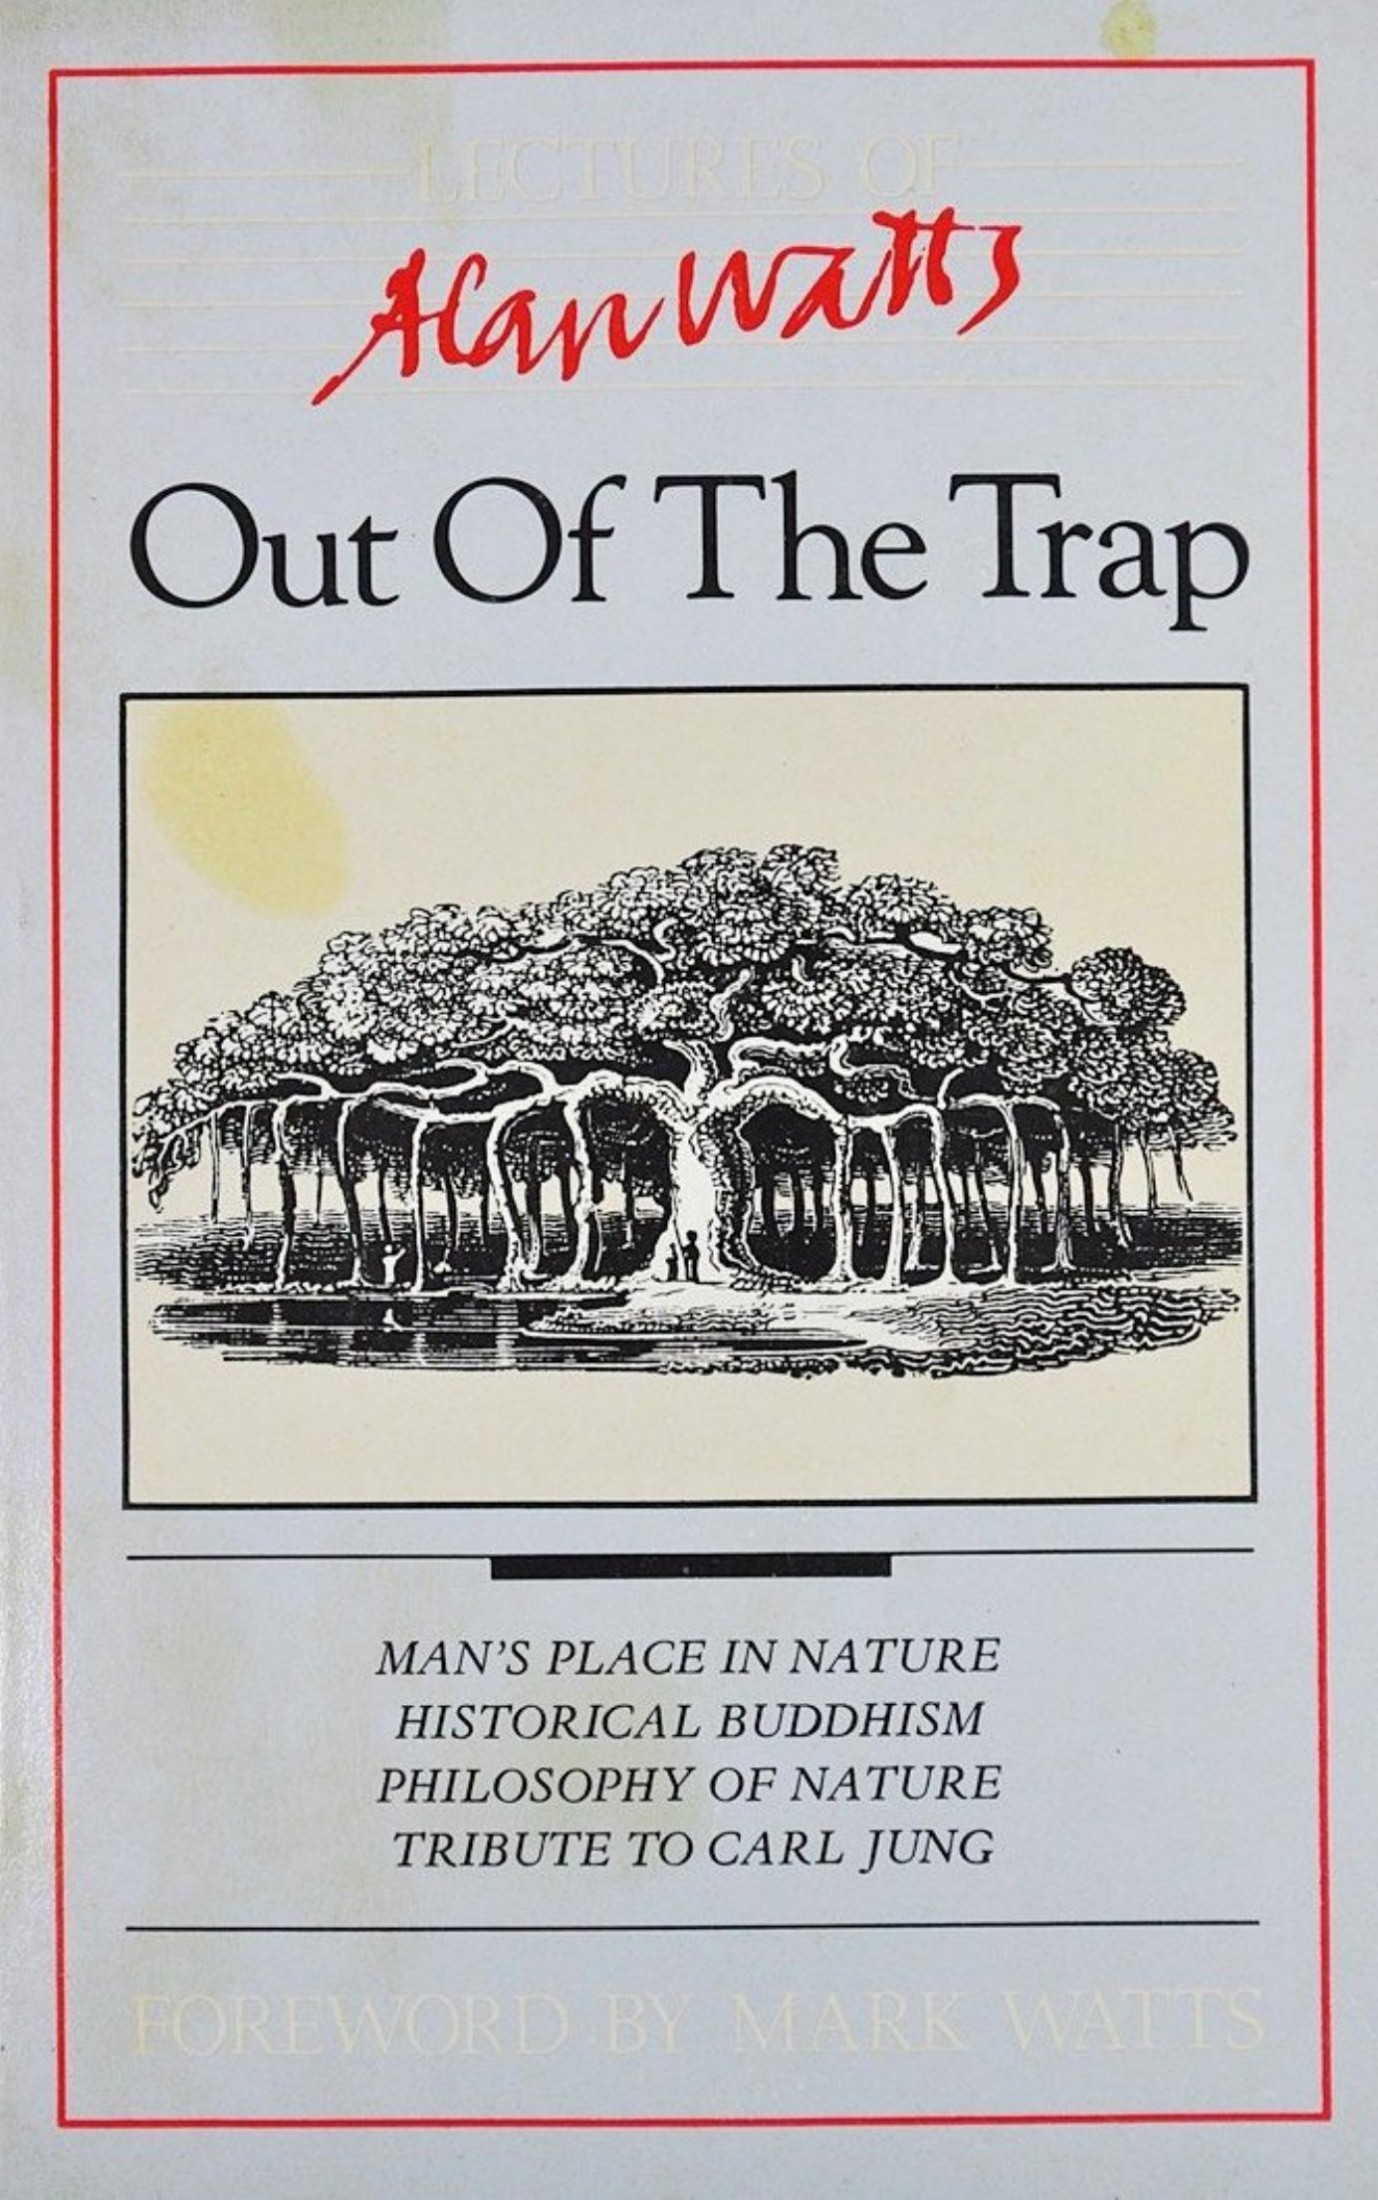 Out of the Trap: Selected Lectures of Alan W. Watts